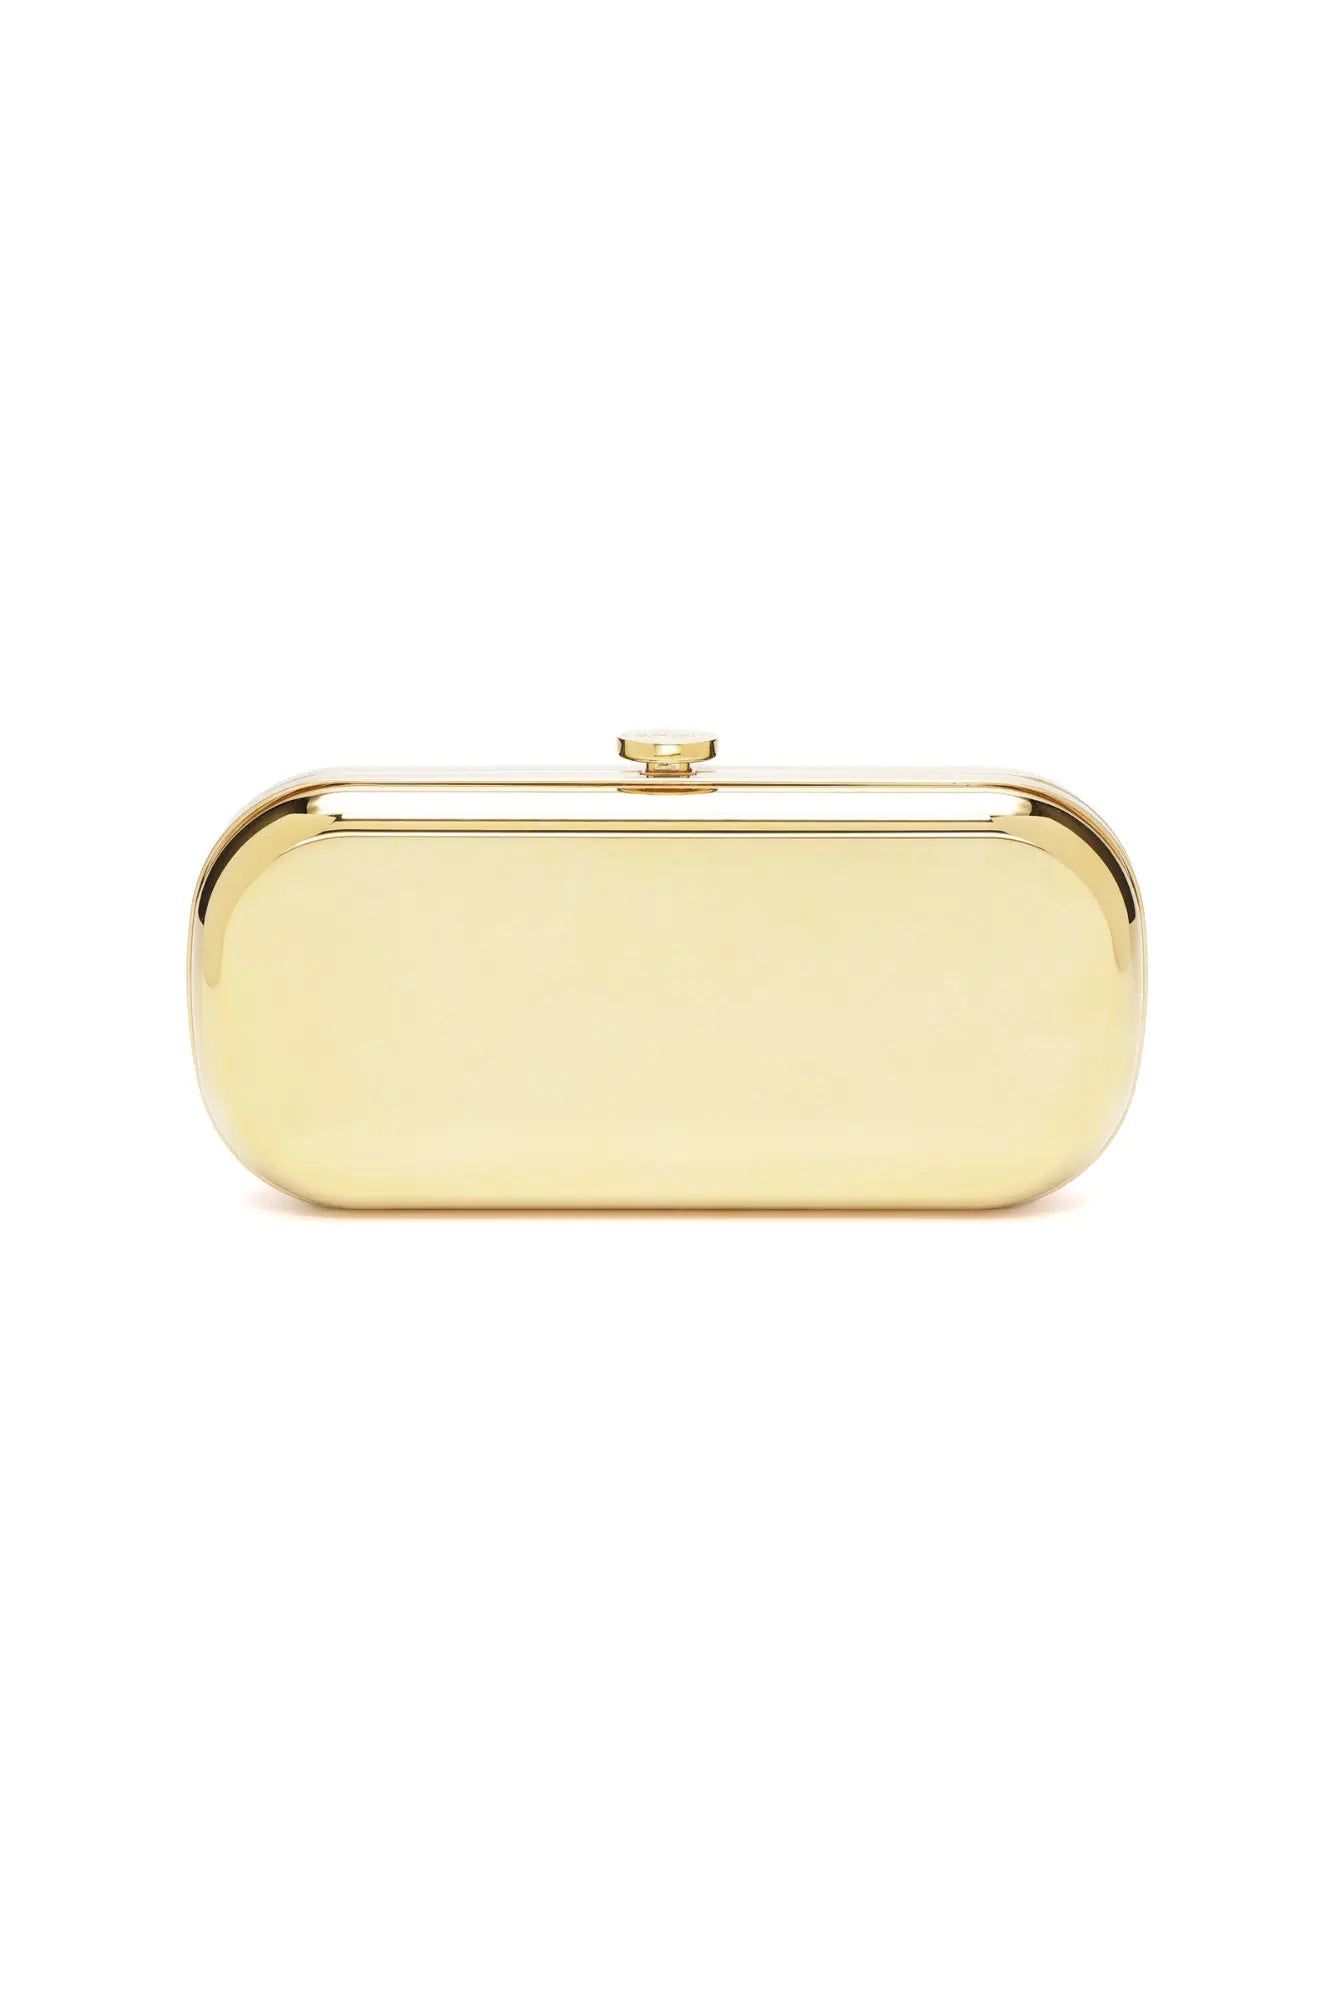 Gold-colored The Bella Rosa Collection Grande Golden Bella Clutch purse on a white background.